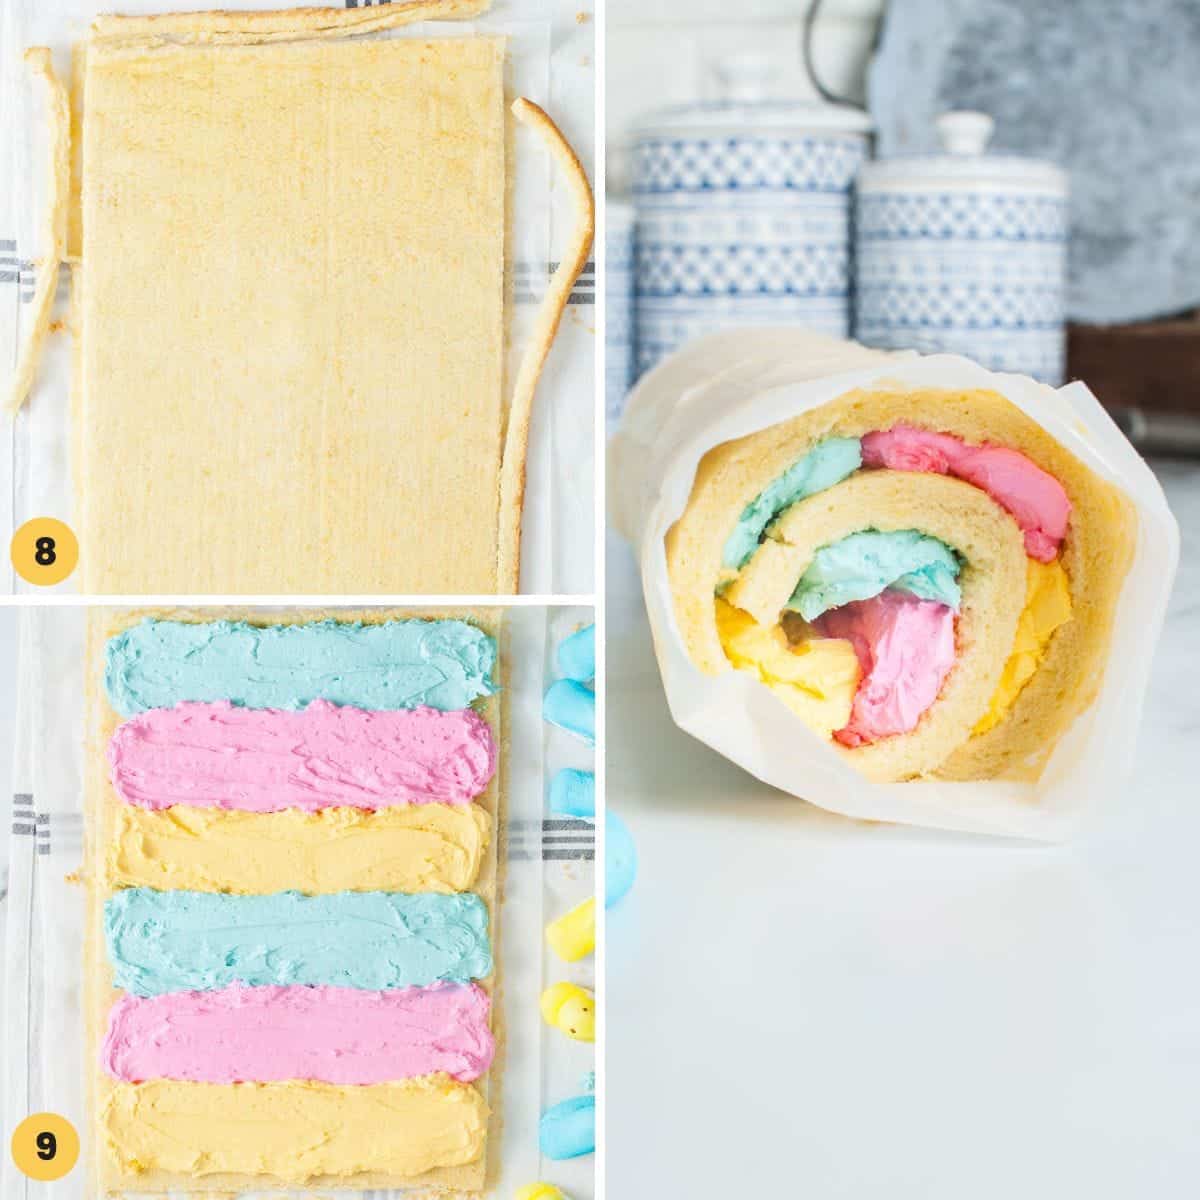 a collage of three images showing how to add colorful frosting to the inside of a cake roll, and how to roll it up.